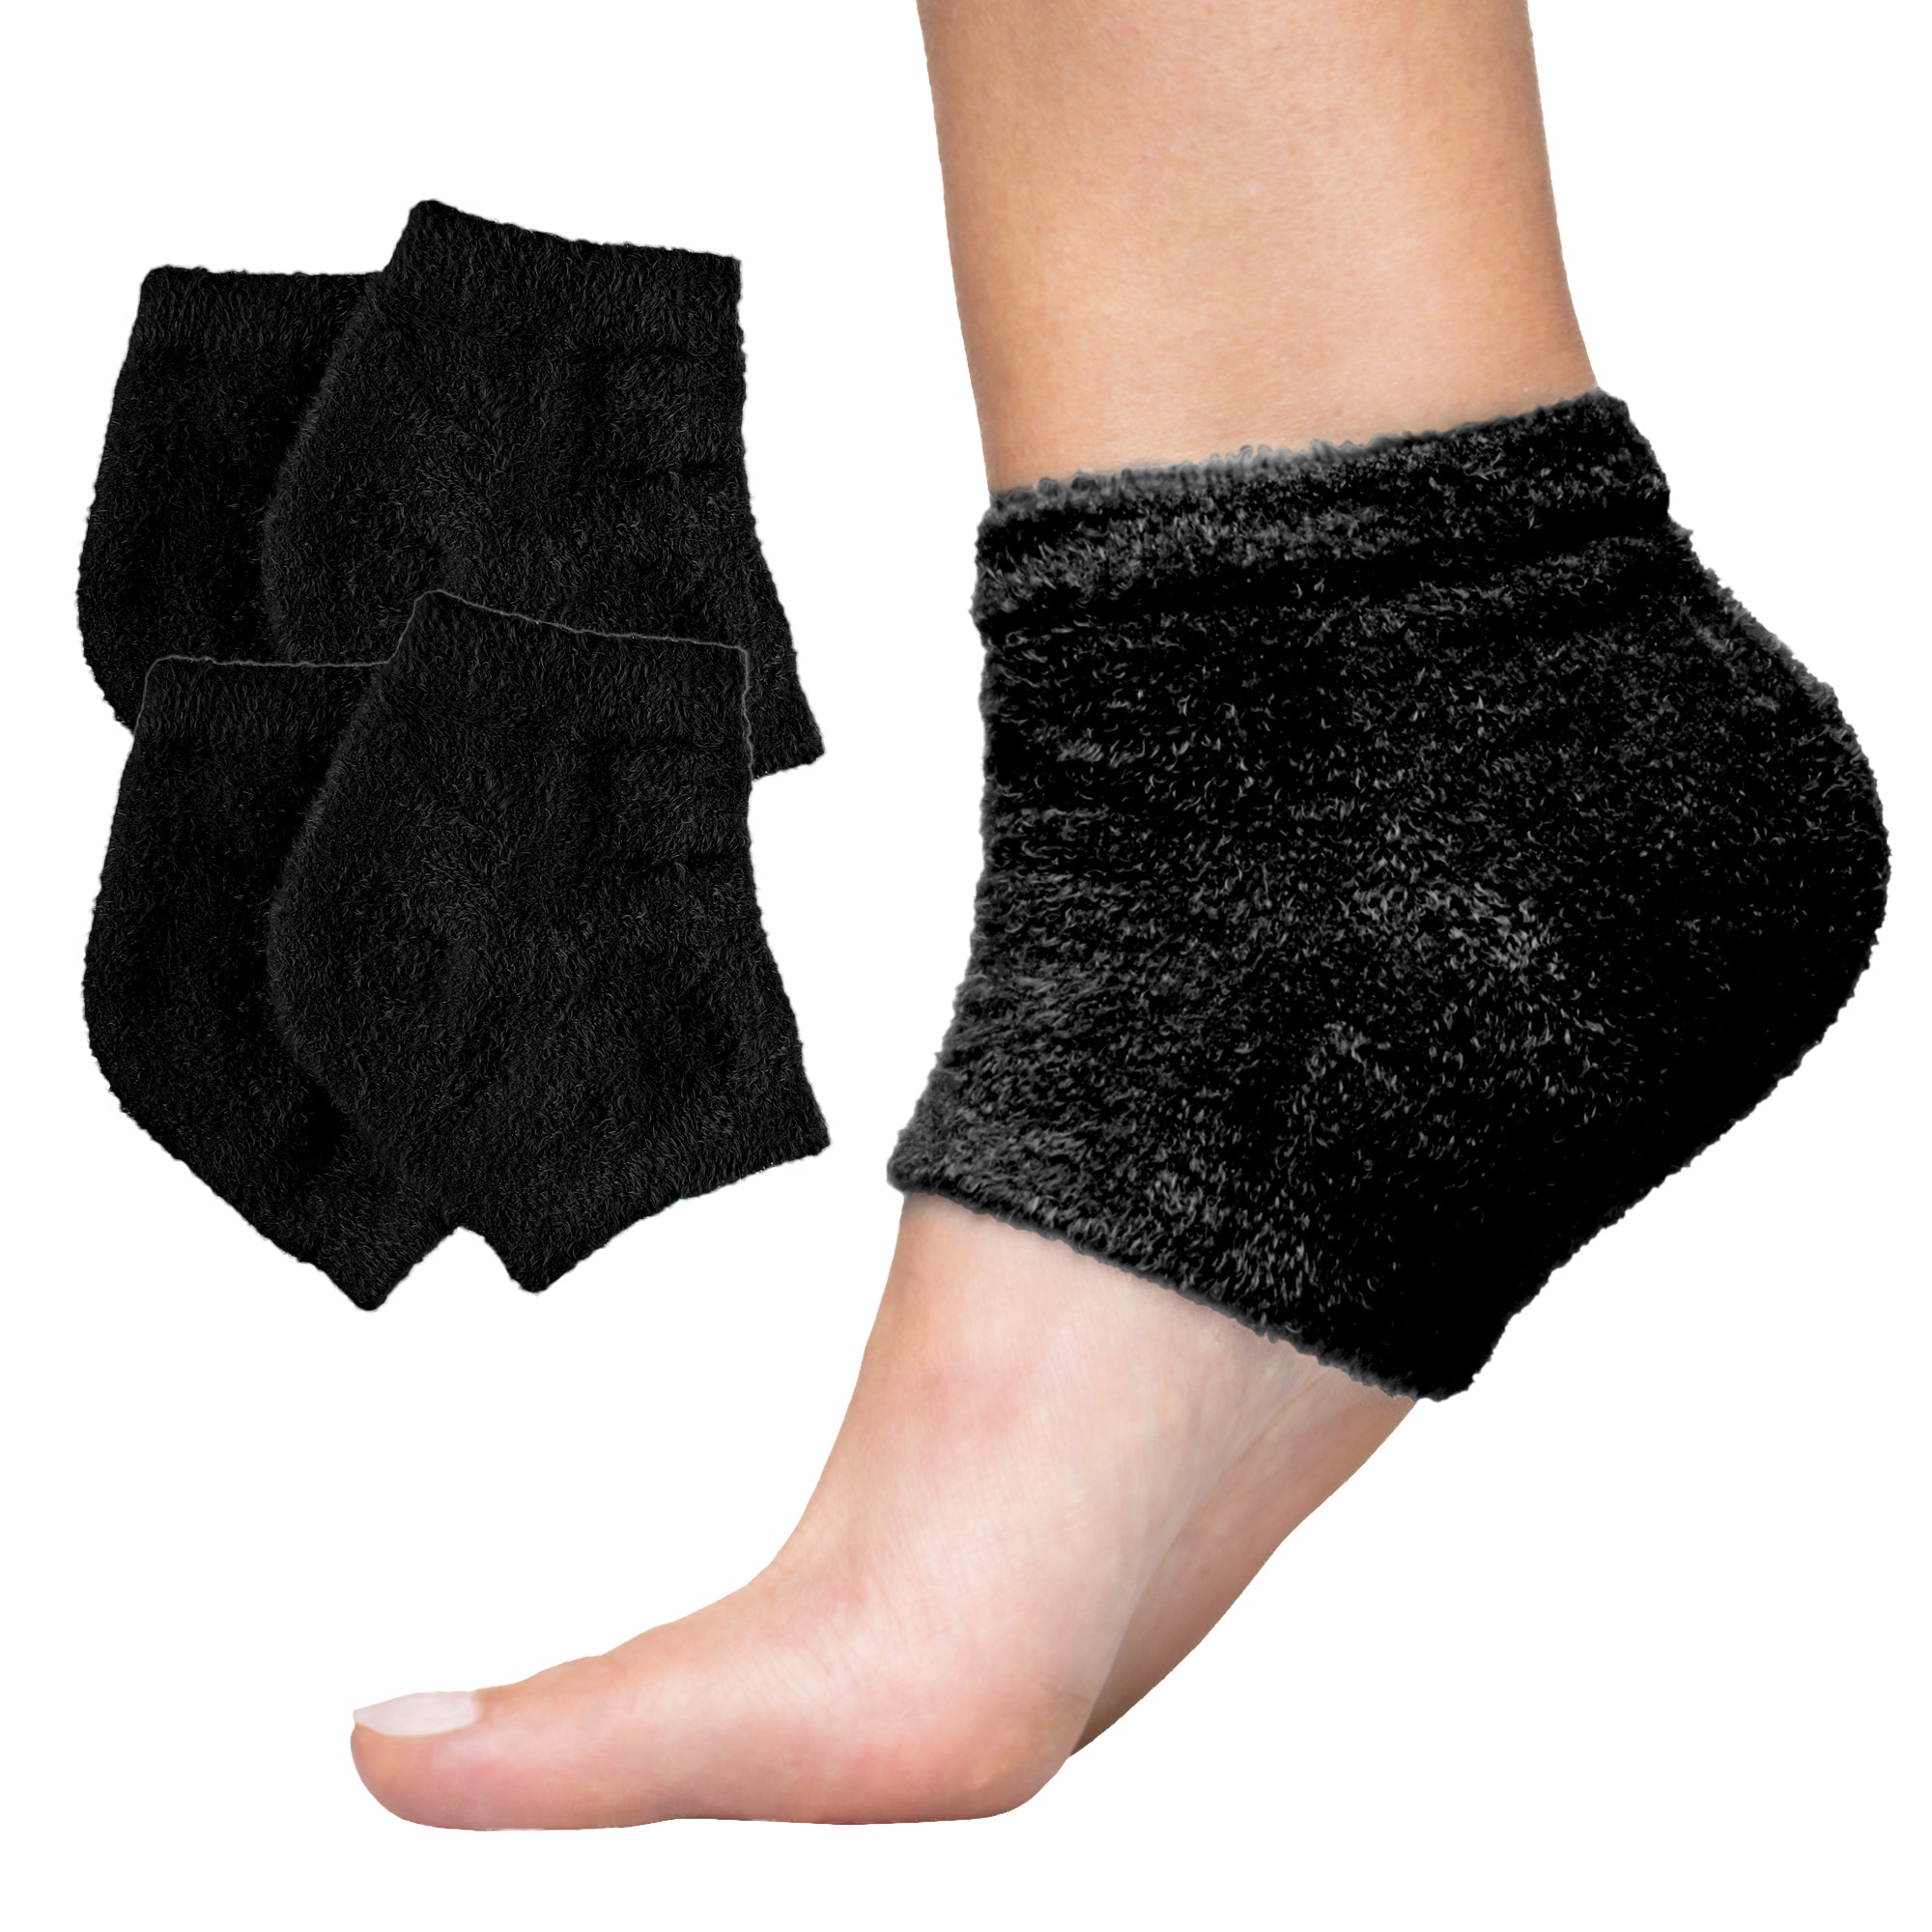 ZenToes Padded Bunion Relief Socks for Women and Men Qatar